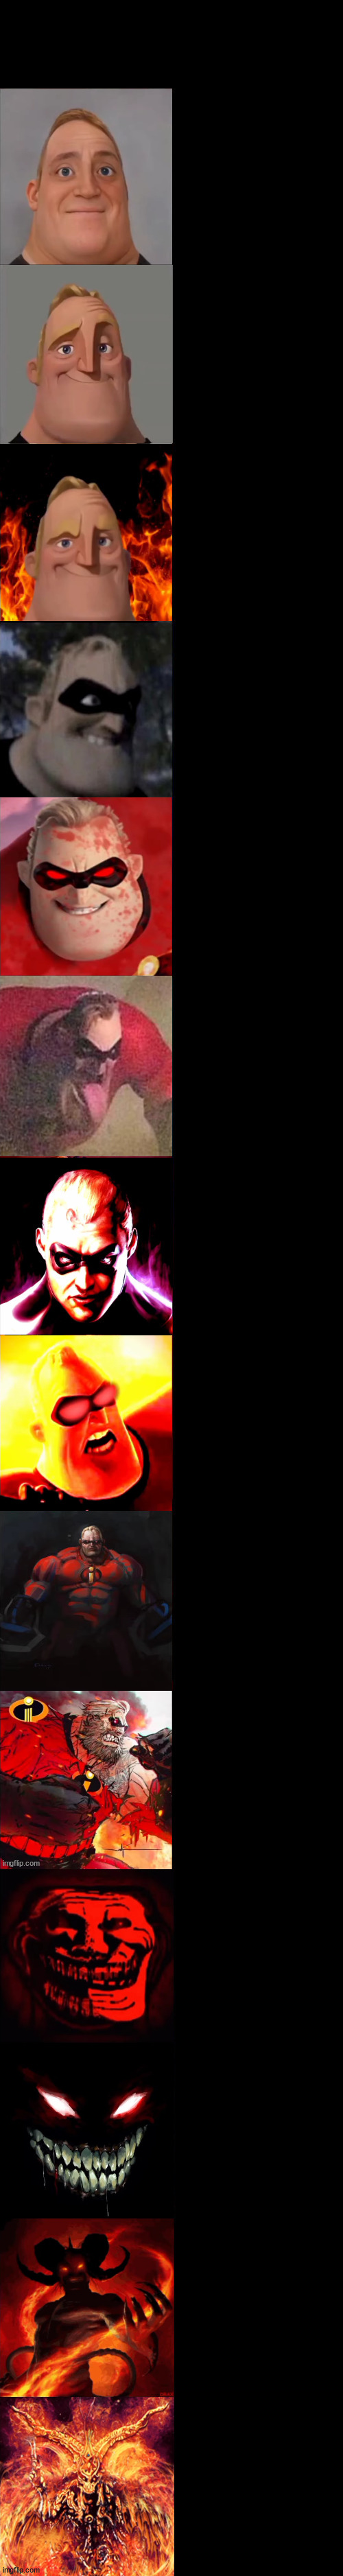 Mr. Incredible Becoming Evil Extended Blank Meme Template